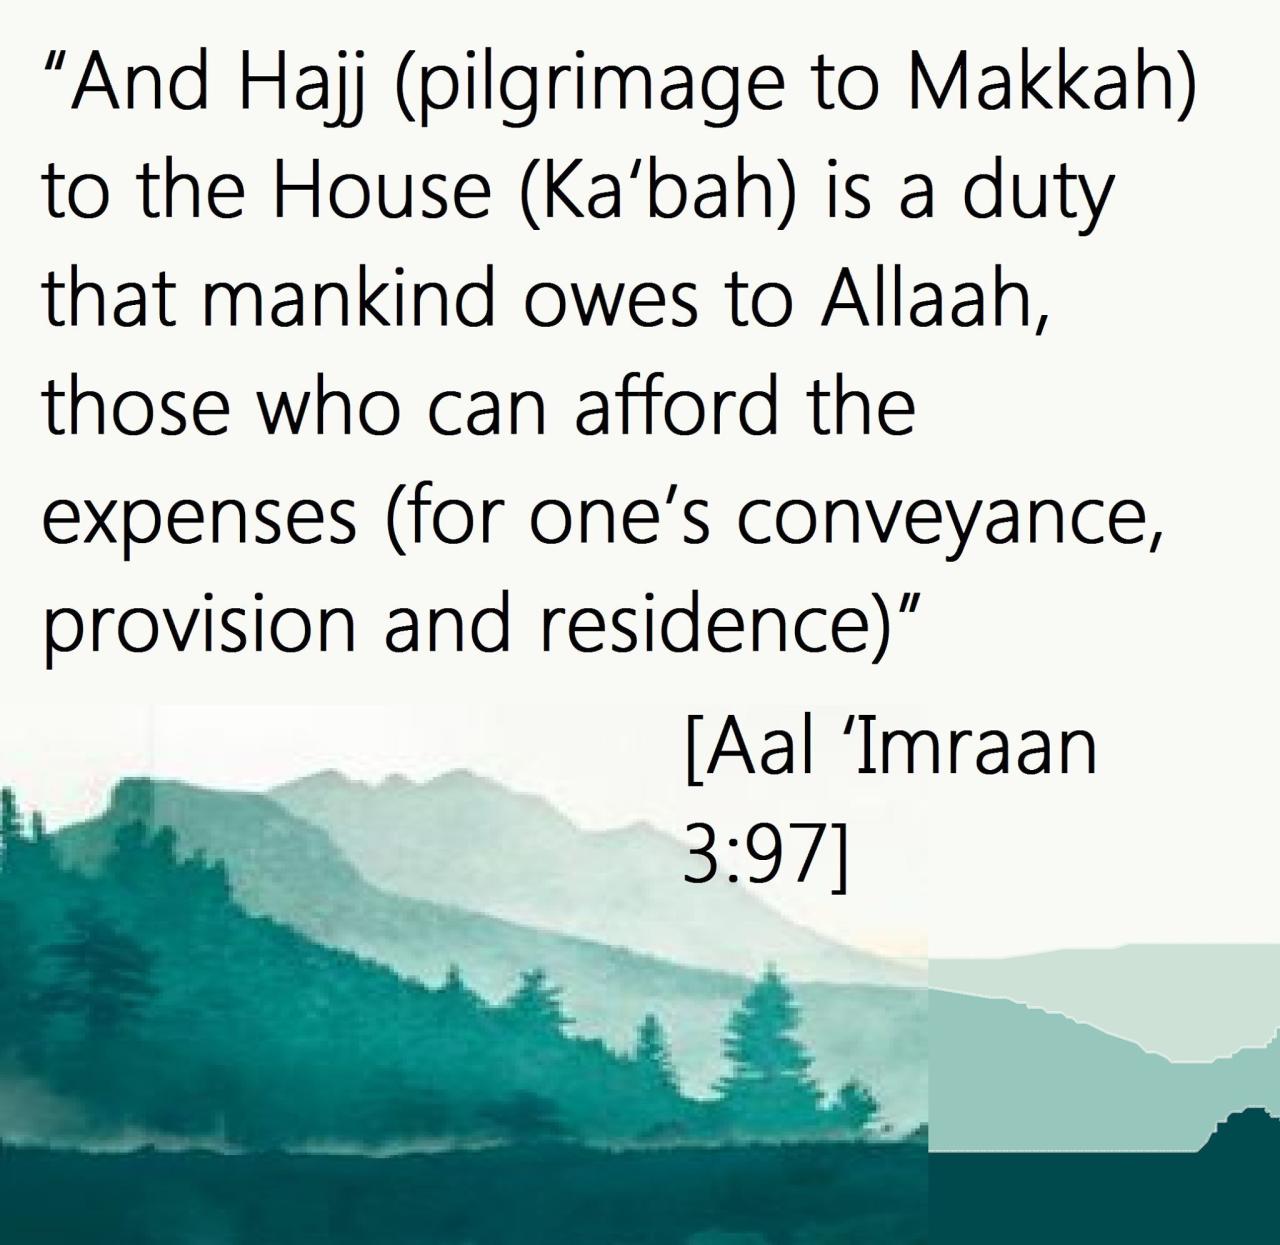 Hajj quotes greetings messages wishes lesson english brotherhood sacrifice teaches brings unity poor row rich same